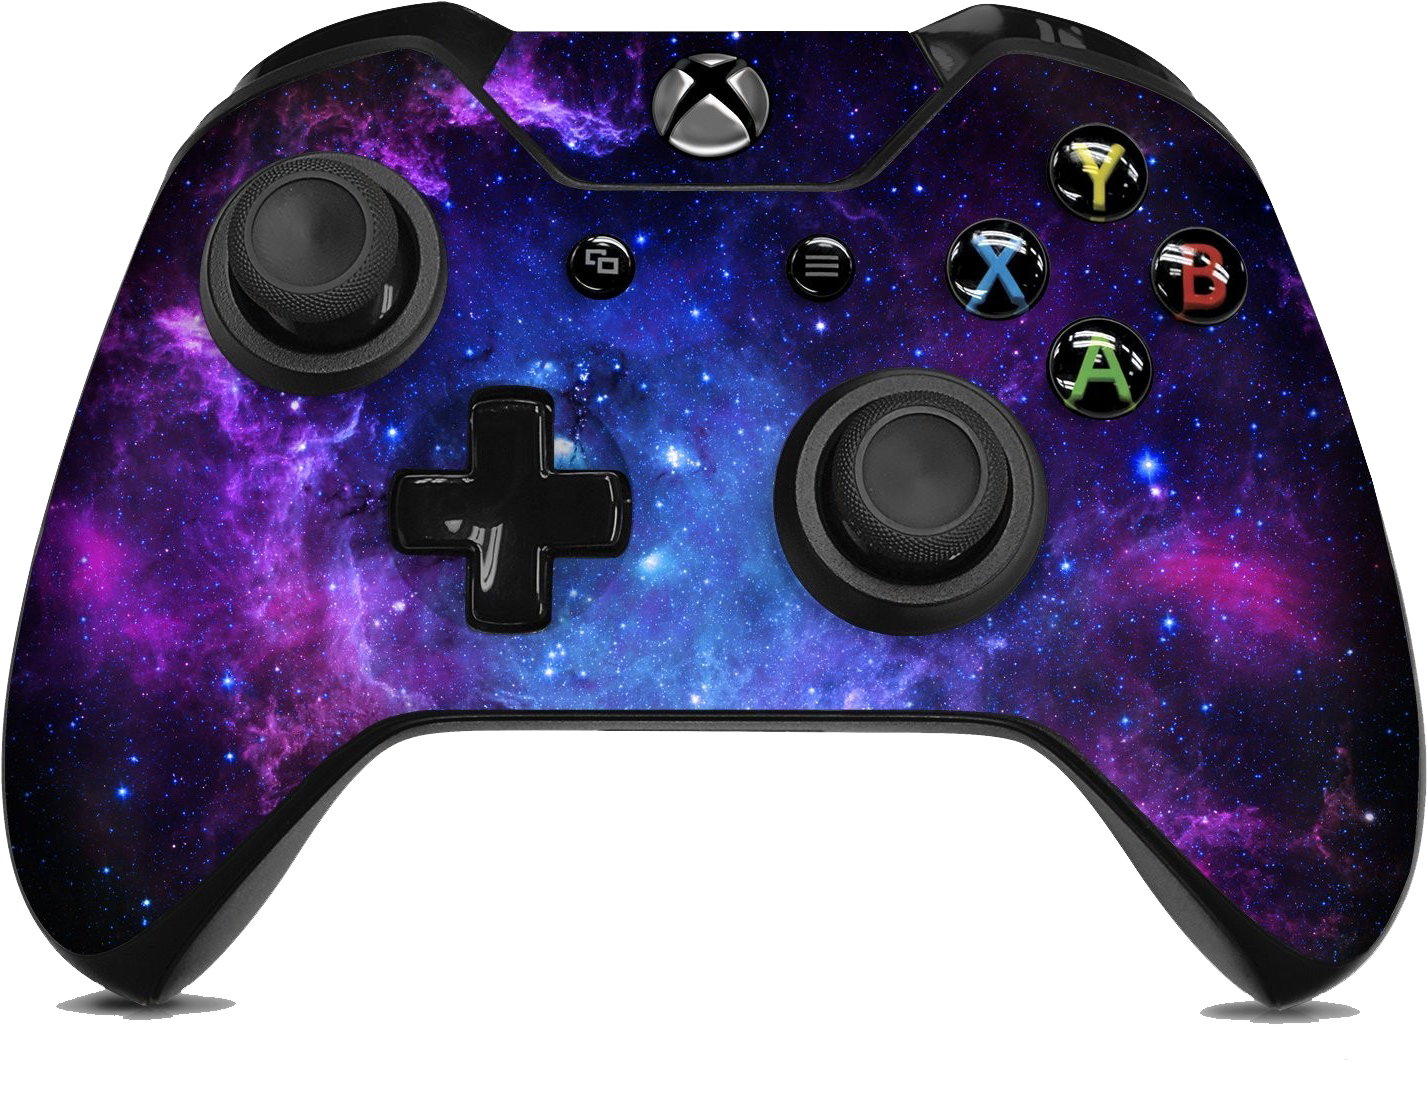 A Video Game Controller With A Galaxy Design